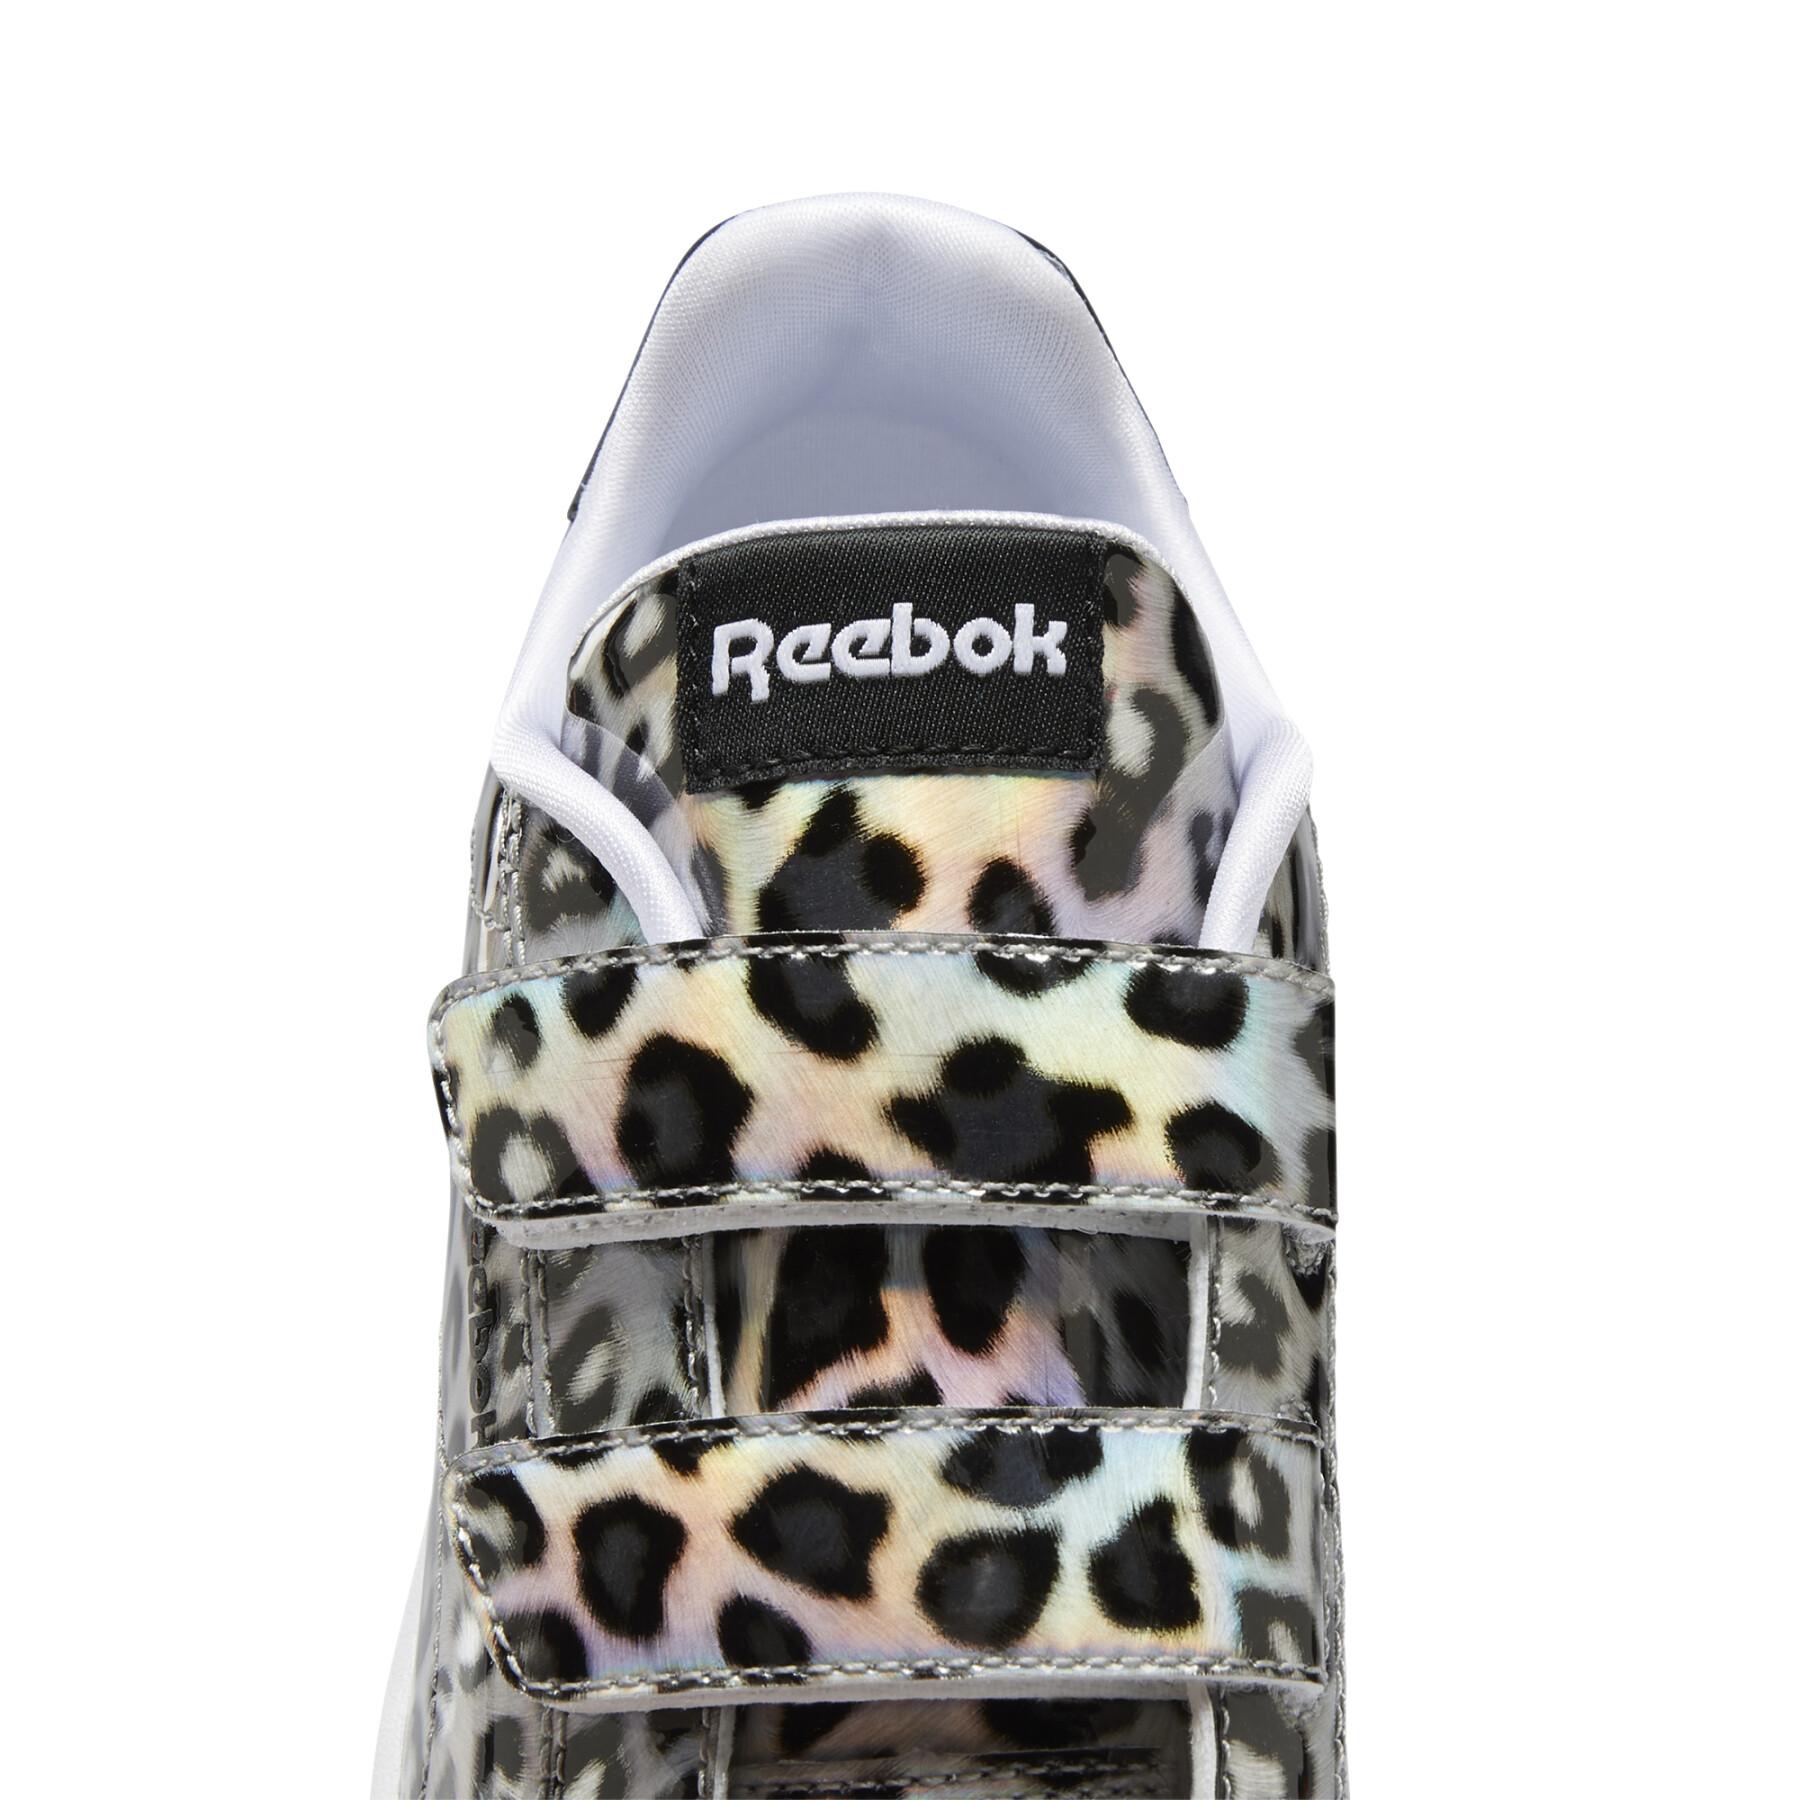 Chaussures fille Reebok Royal Complete CLN 2